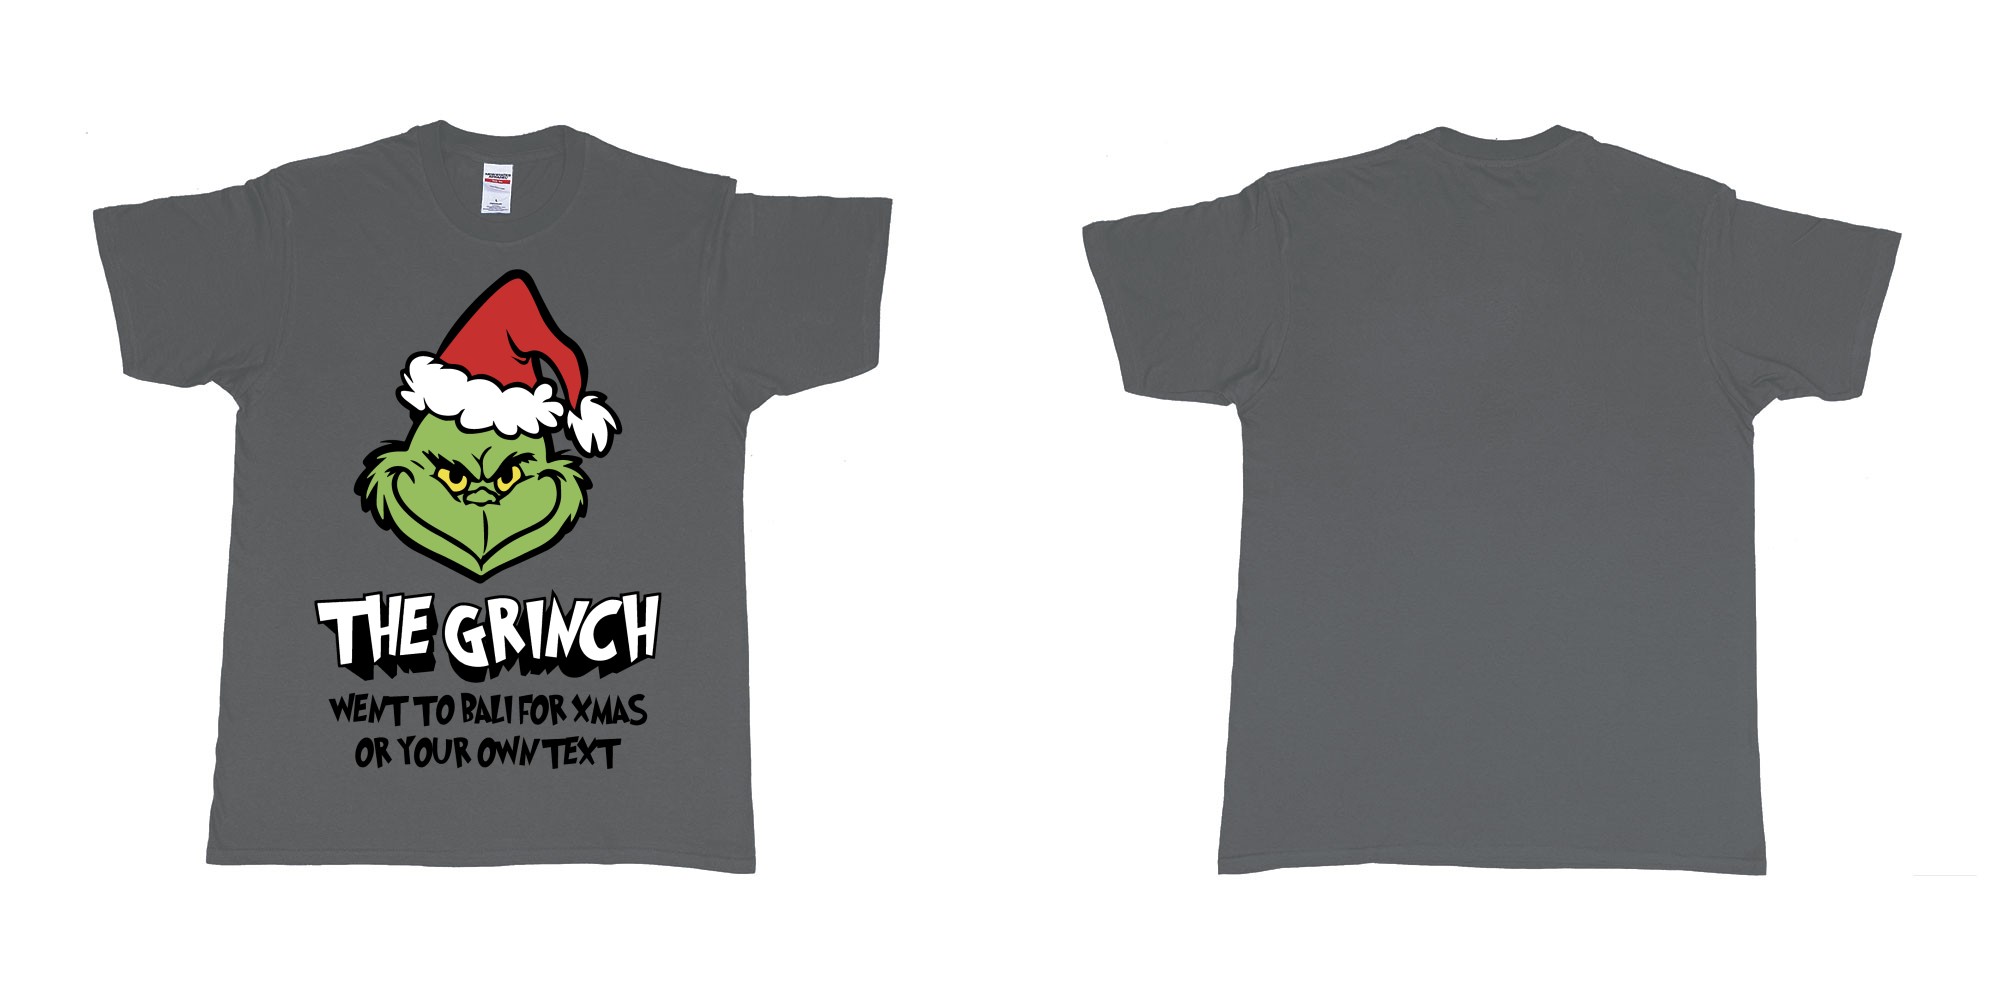 Custom tshirt design the grinch went to bali for xmas tshirt in fabric color charcoal choice your own text made in Bali by The Pirate Way